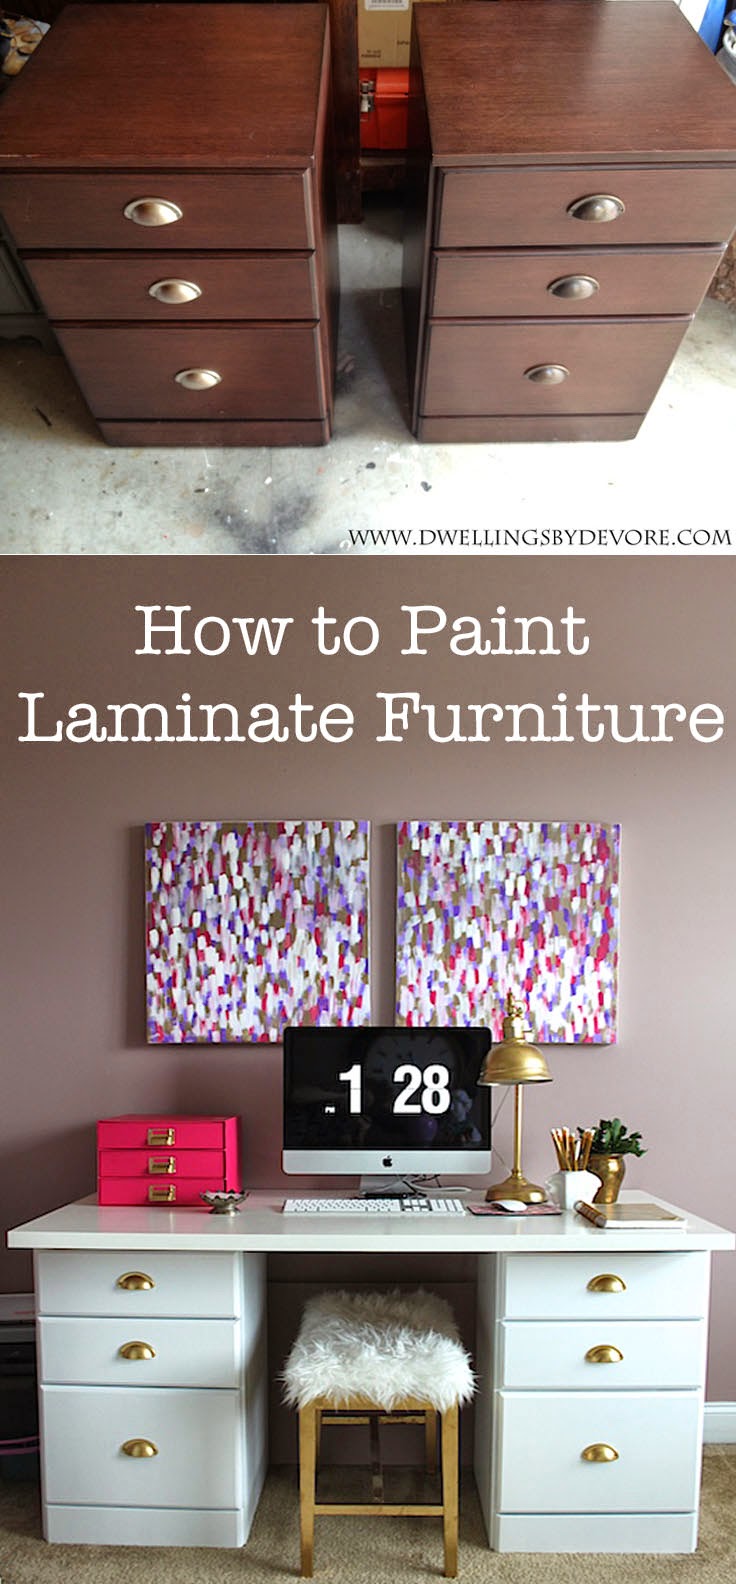 How to Paint Laminate Furniture, The Right Way!